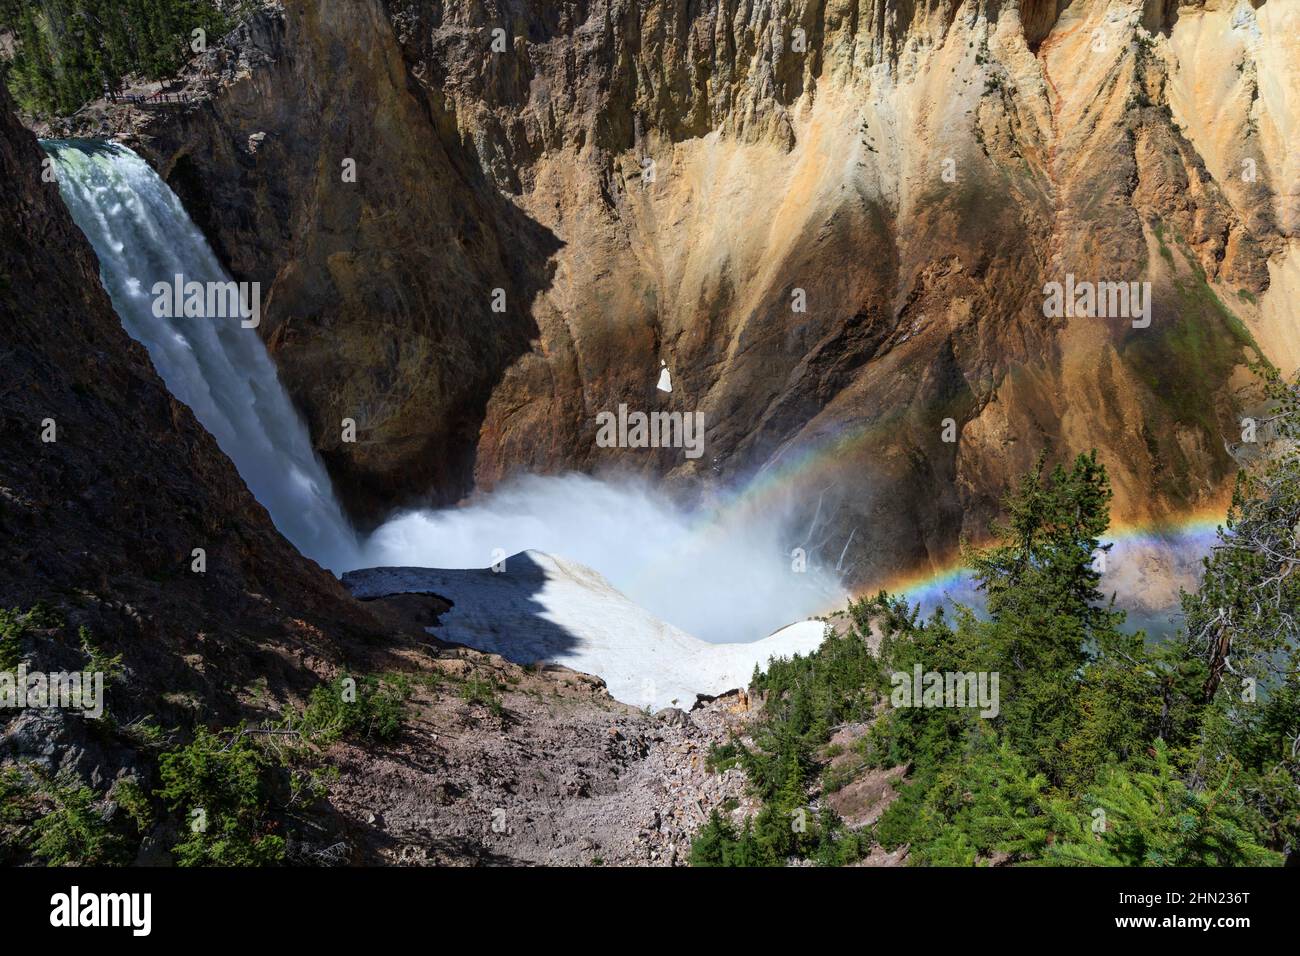 Rainbow at Lower Falls et Yellowstone Grand Canyon, parc national de Yellowstone, Wyoming, États-Unis Banque D'Images